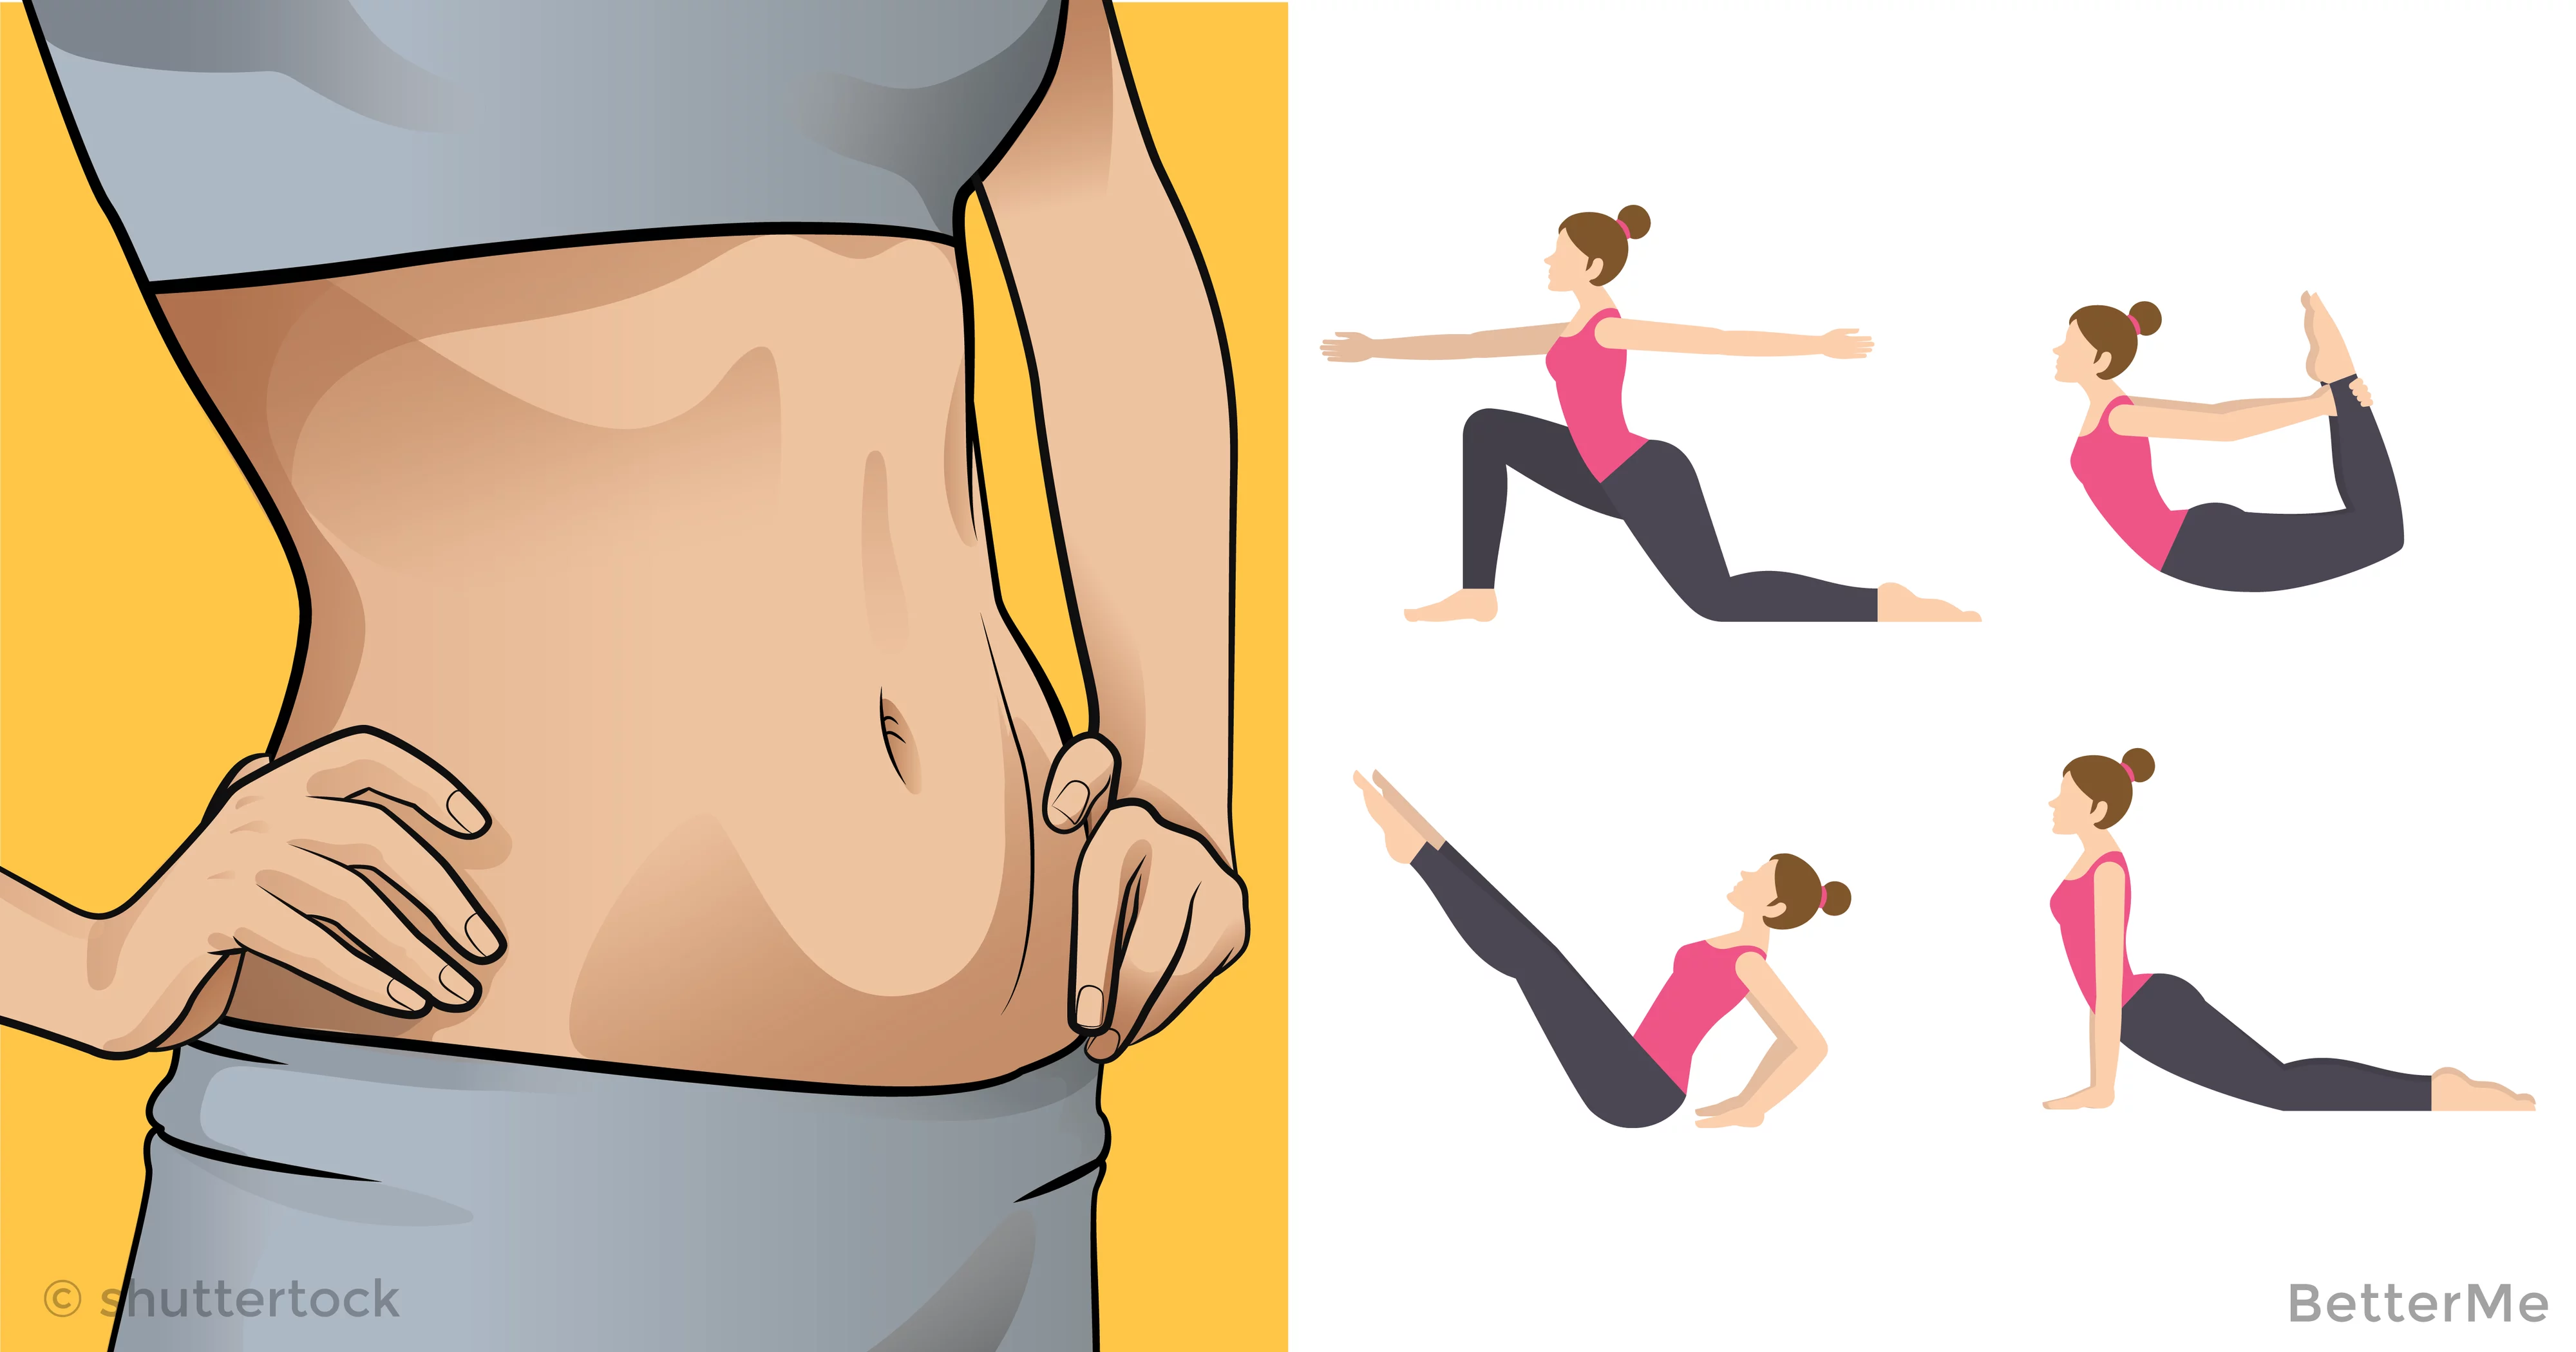 5 Simple & Super Stretches to Help You Lose Weight Quickly